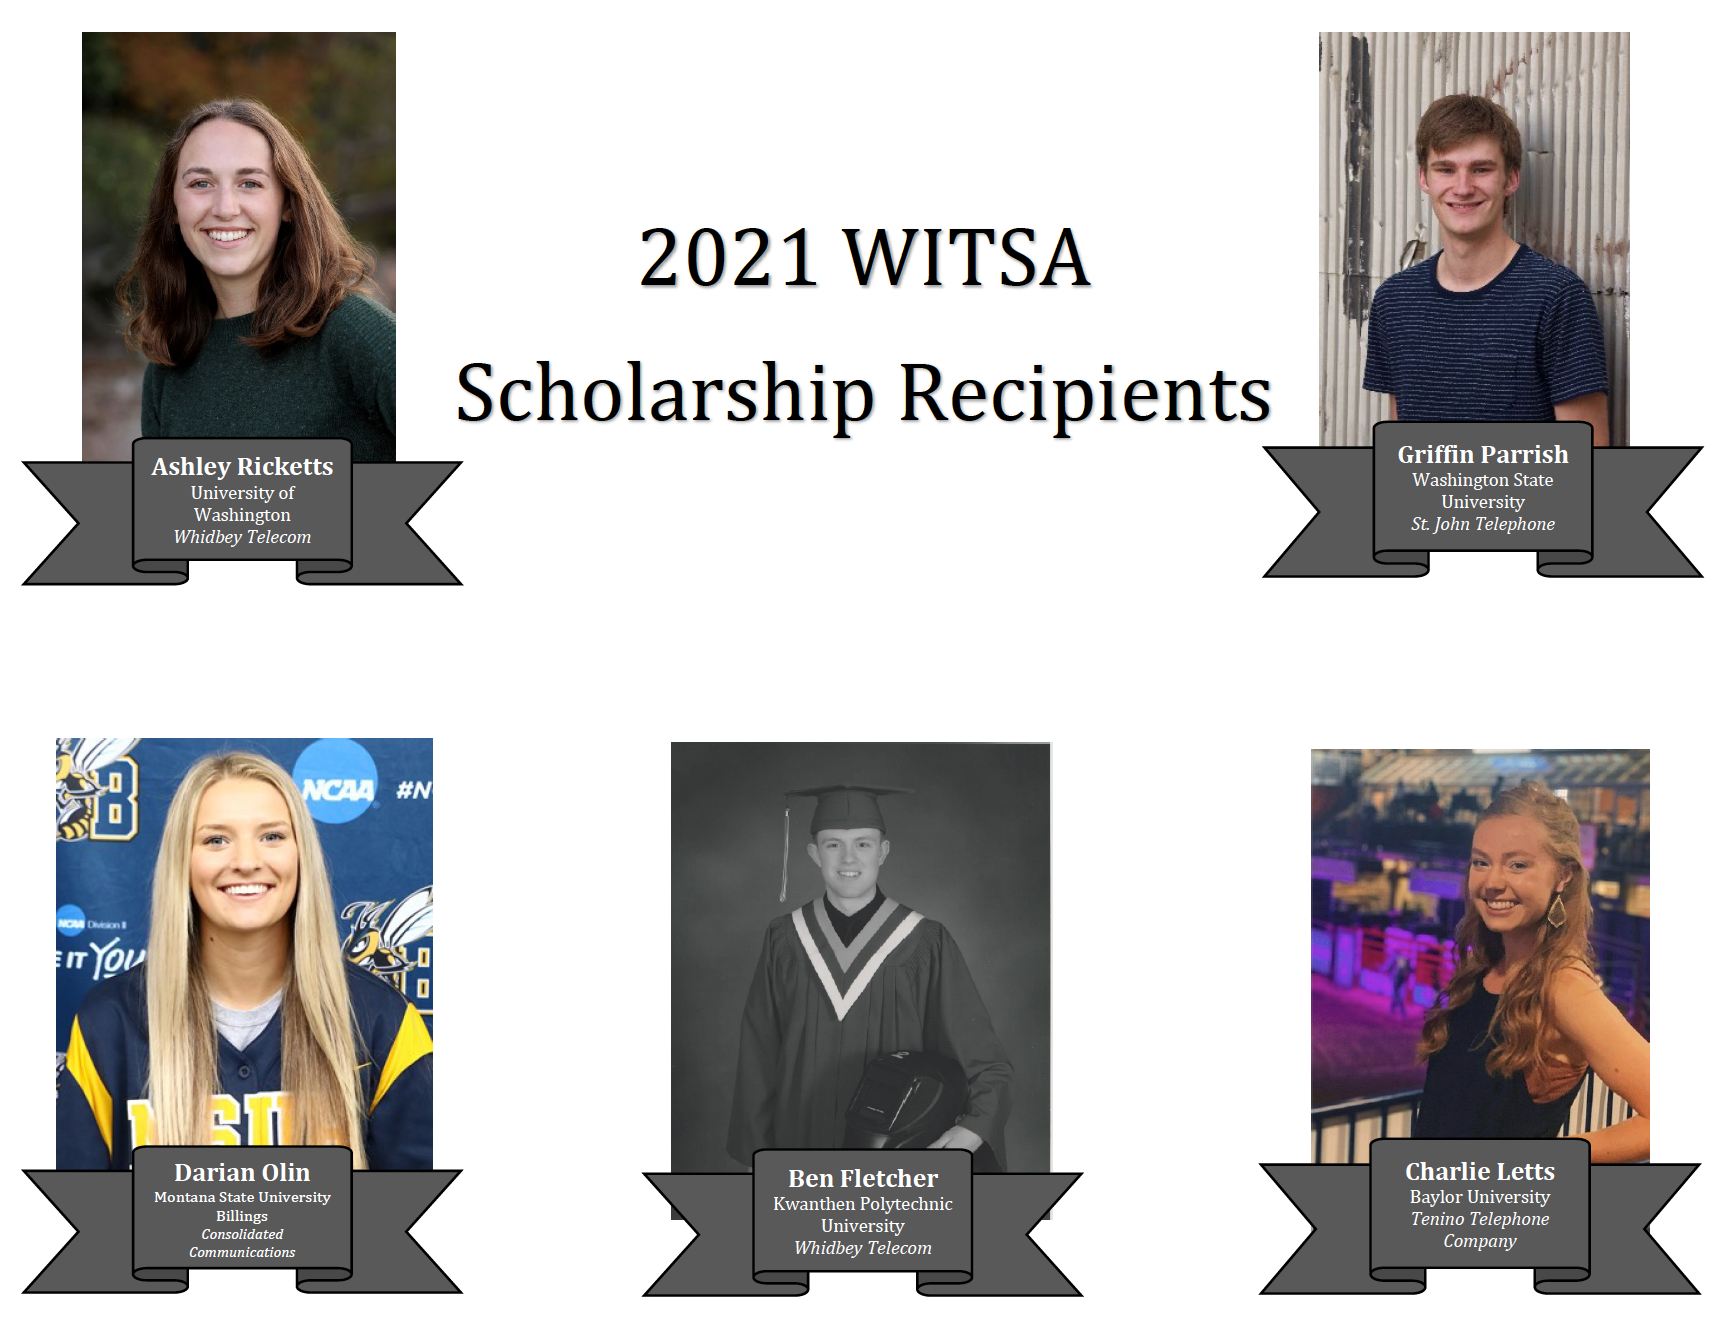 2021 WITSA Scholarship Recipients. Clockwise starting in upper left is photo of Ashley Ricketts who is attending the University of Washington, upper right is photo of Griffin Parrish attending Washington State University, photo of Charlie Letts who is attending Baylor University, photo of Ben Fletcher who is attending Kwanthen Polytechnic University, Darian Olin who is attending Montana State University in Billings.